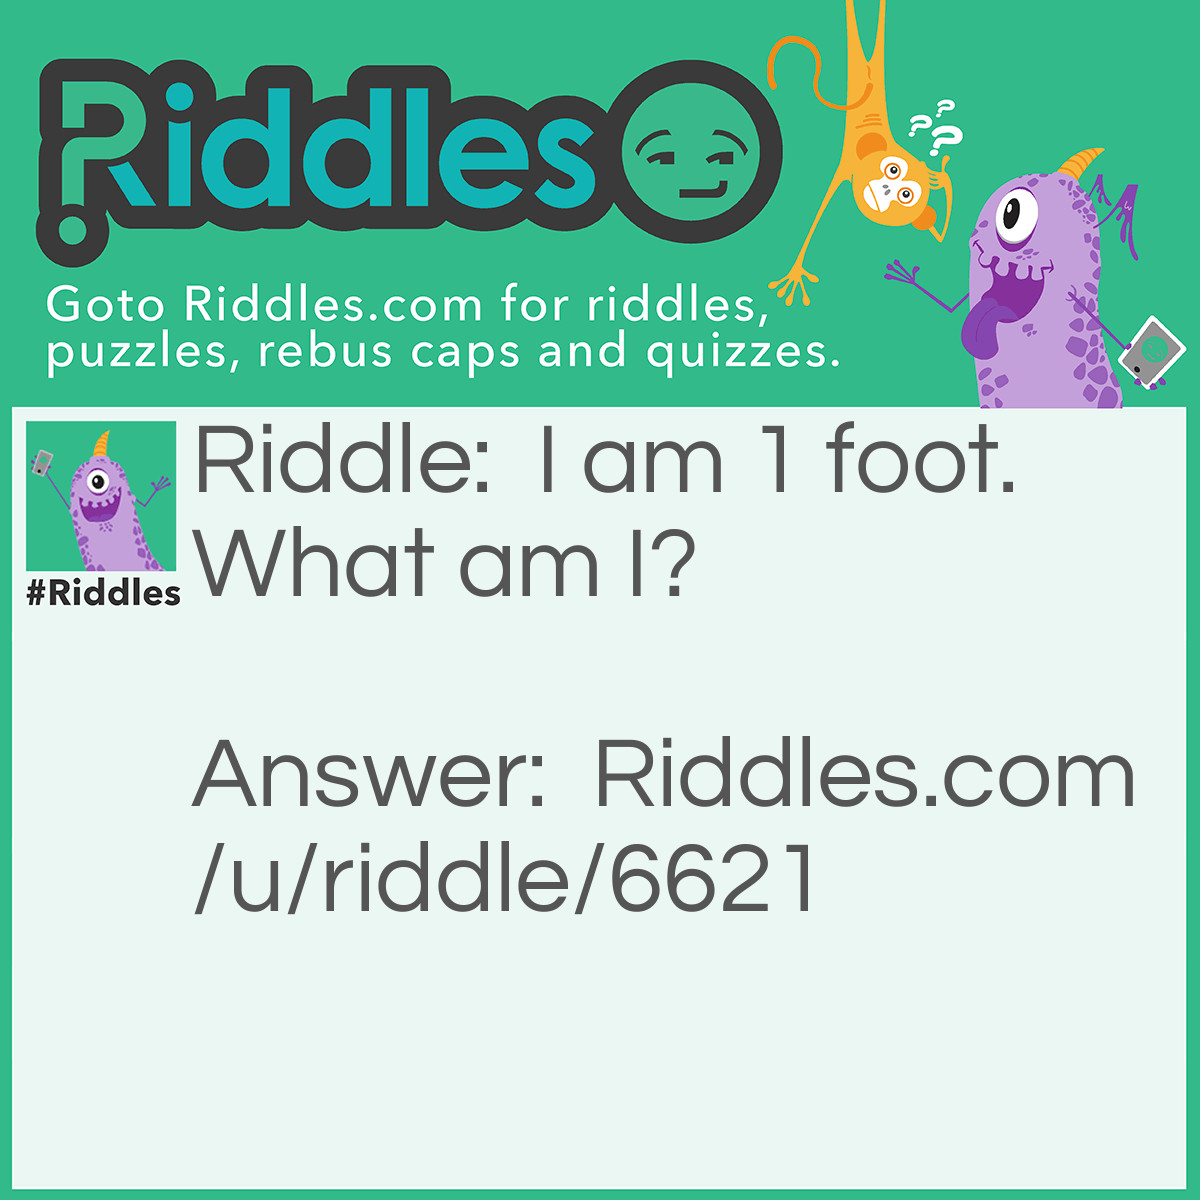 Riddle: I am 1 foot. What am I? Answer: A foot.